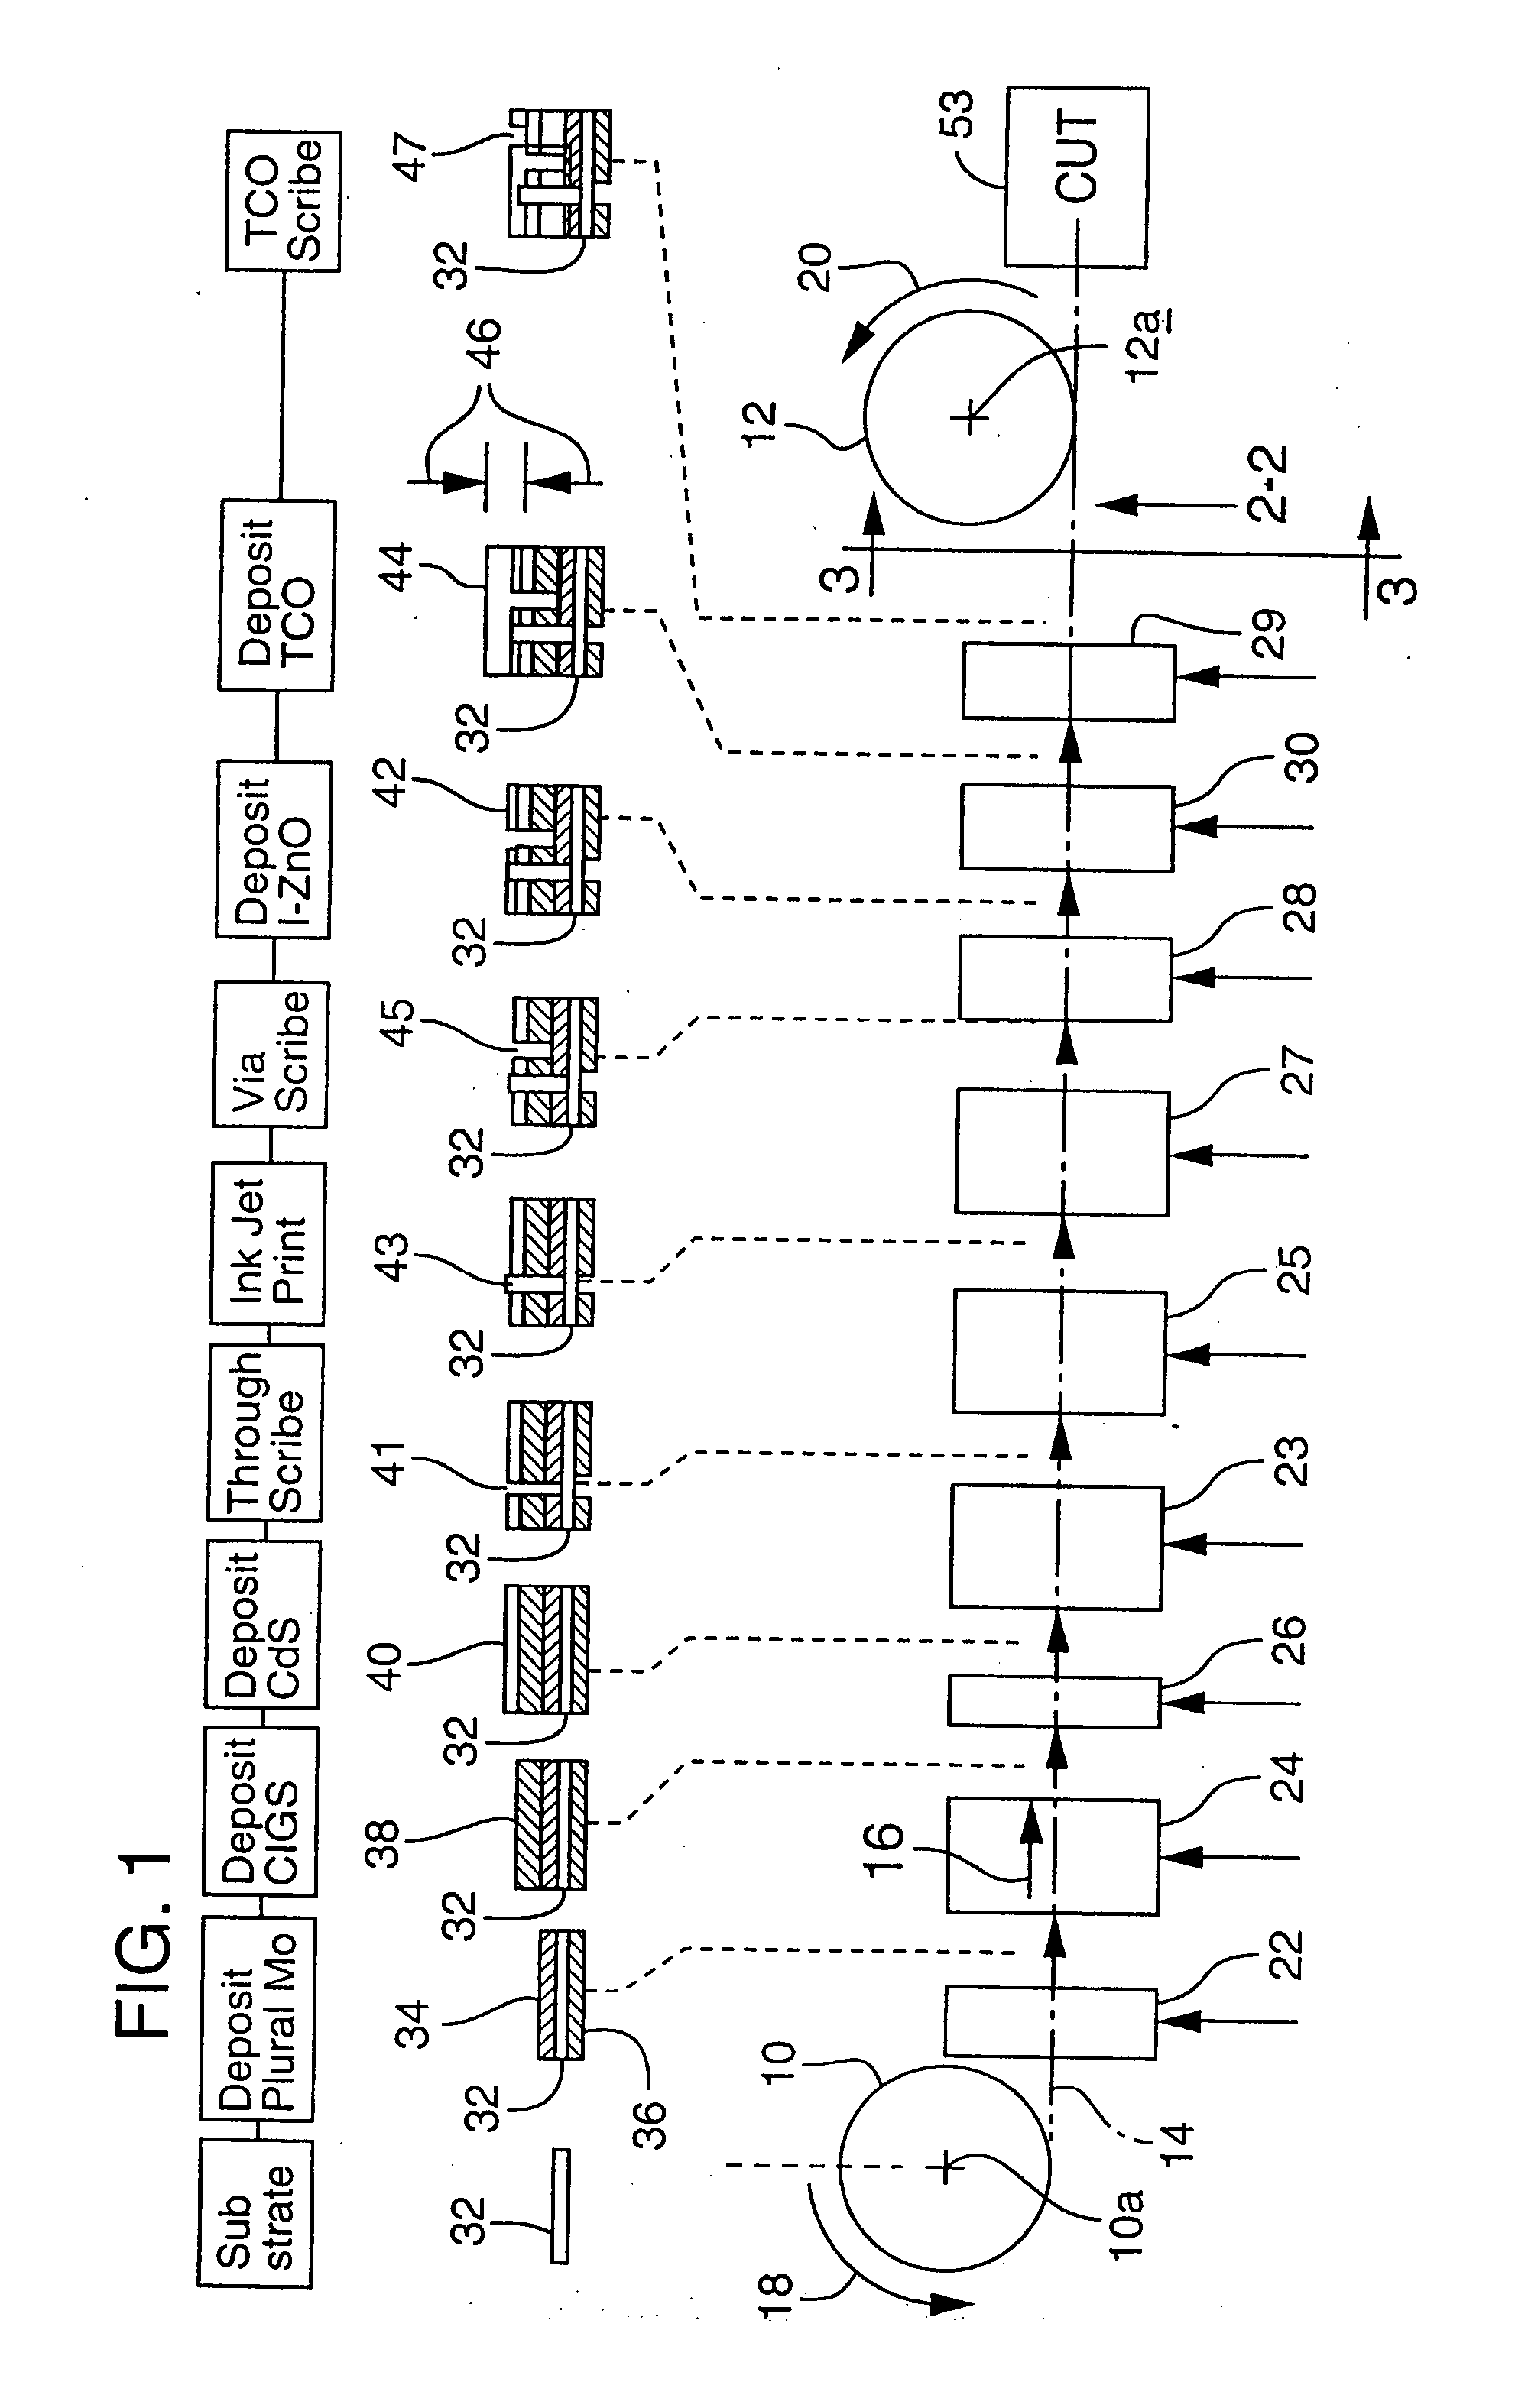 Nozzle-based, vapor-phase, plume delivery structure for use in production of thin-film deposition layer